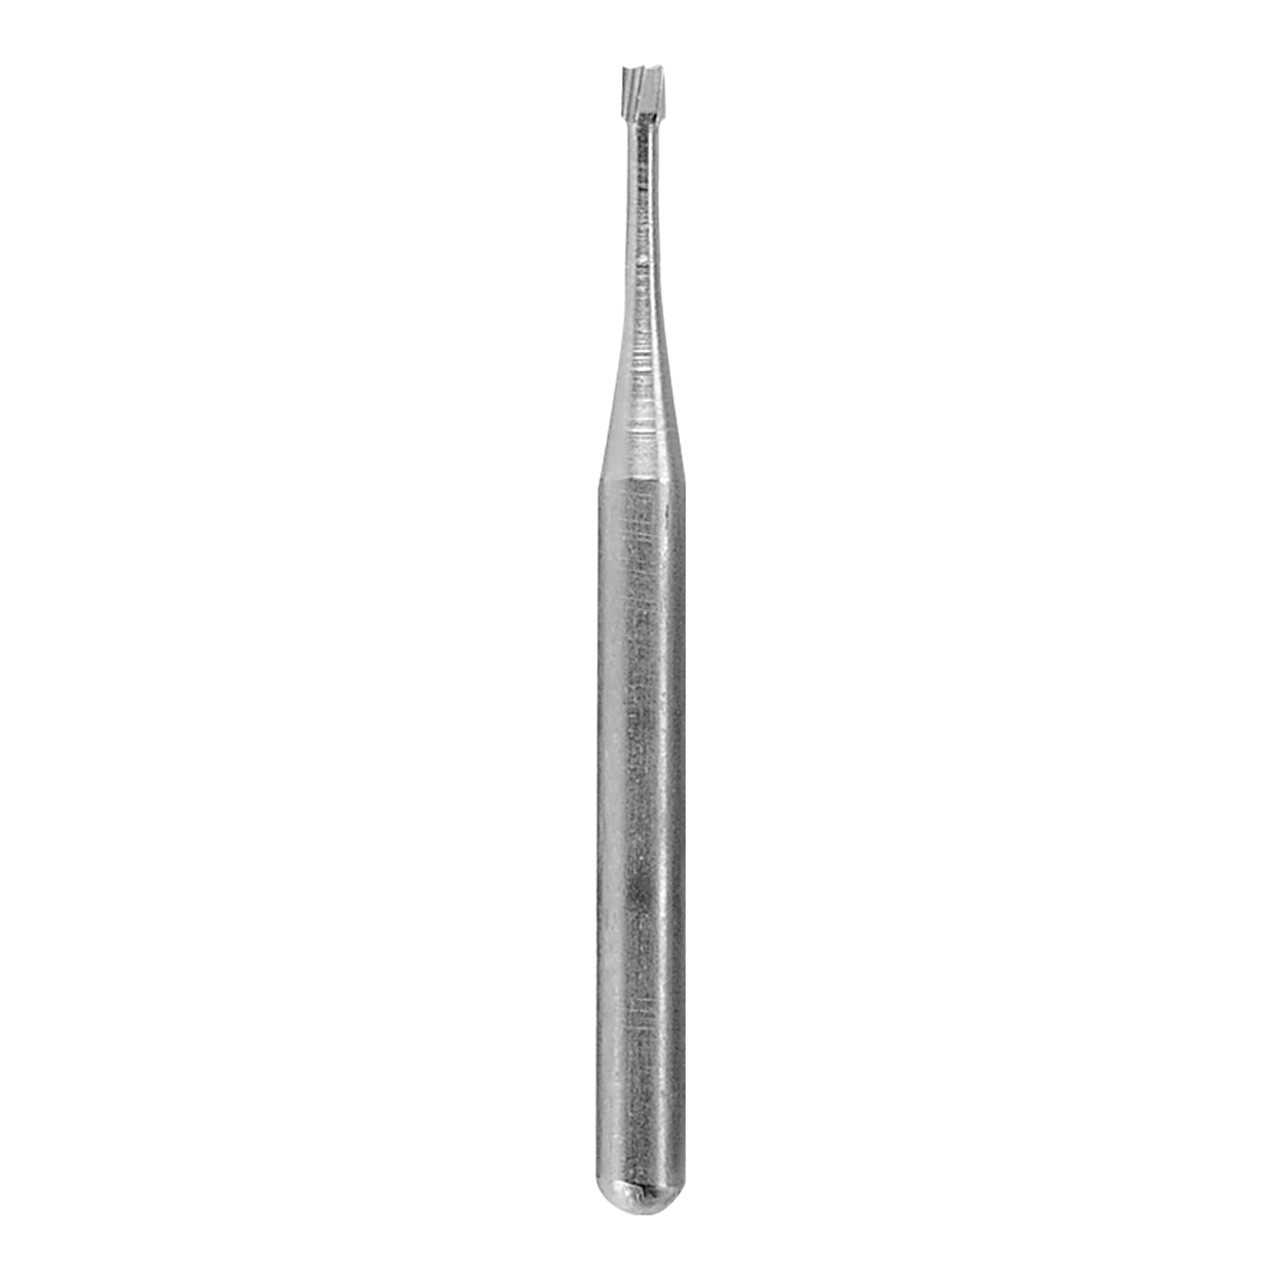 Inverted Cone 1.60mm Carbide Friction Grip Bur 1/16" Shank